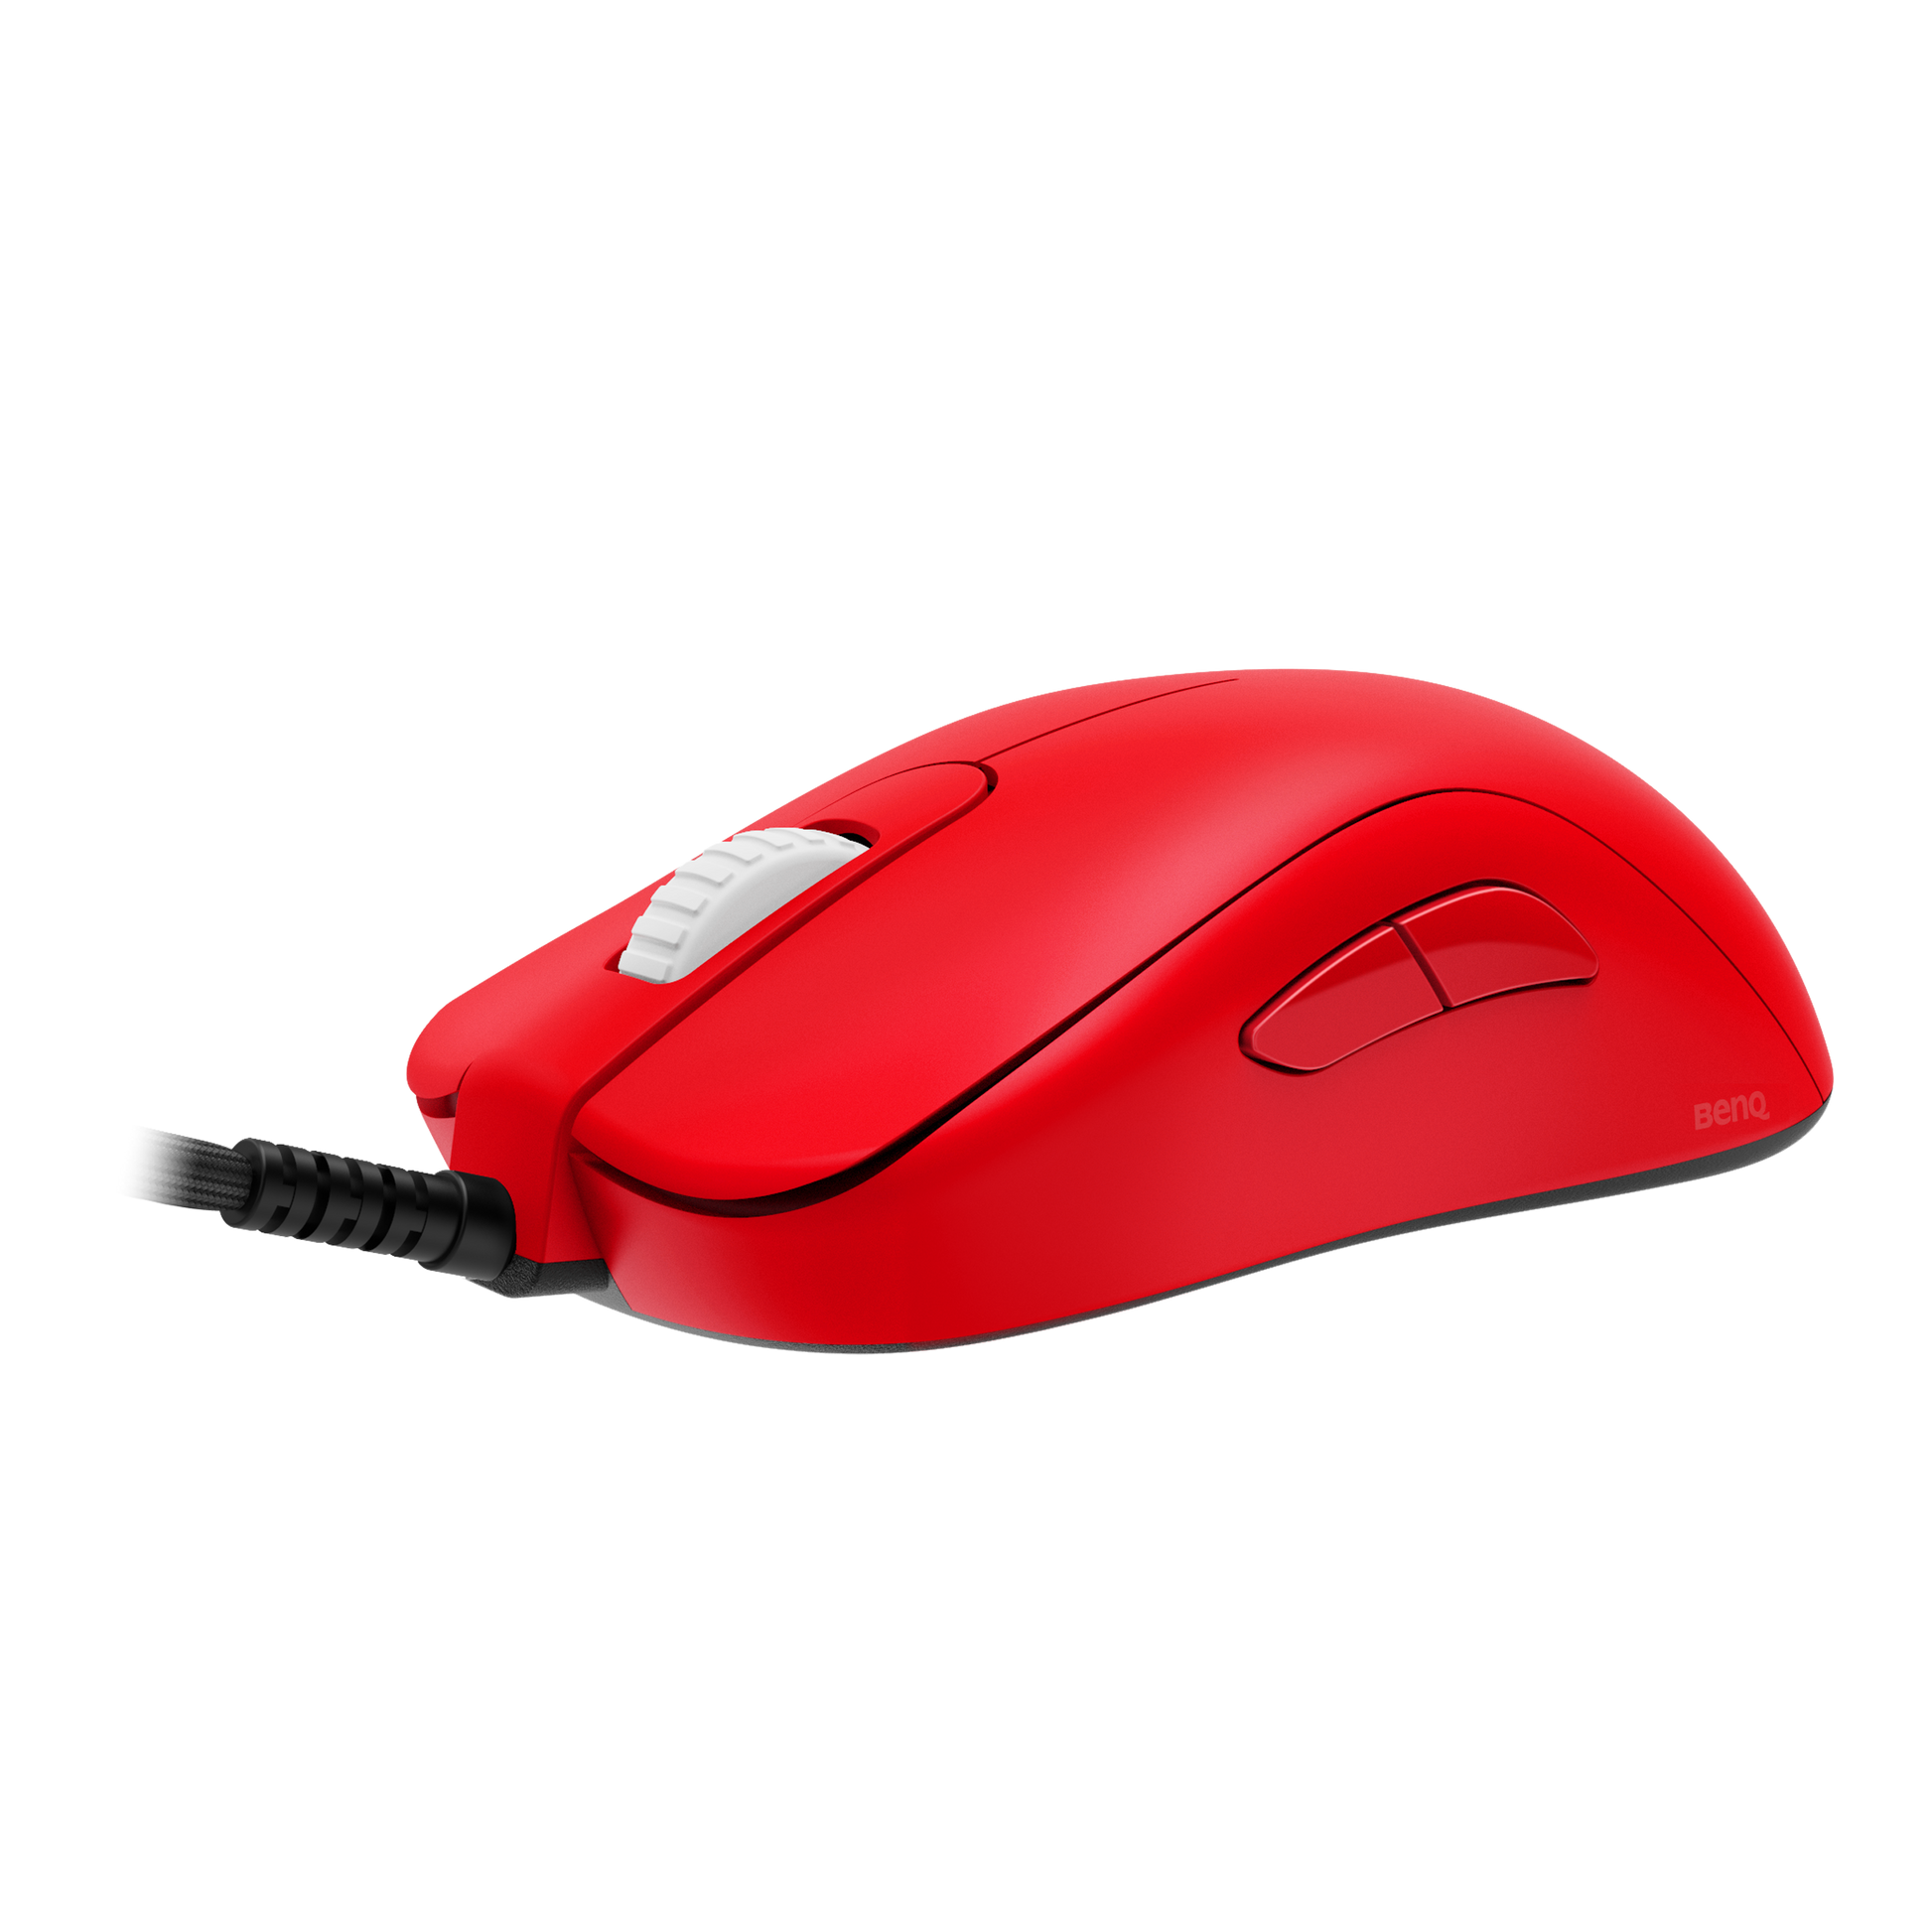 Click Speed Test For Mouse Speed - Computer Market - Nigeria